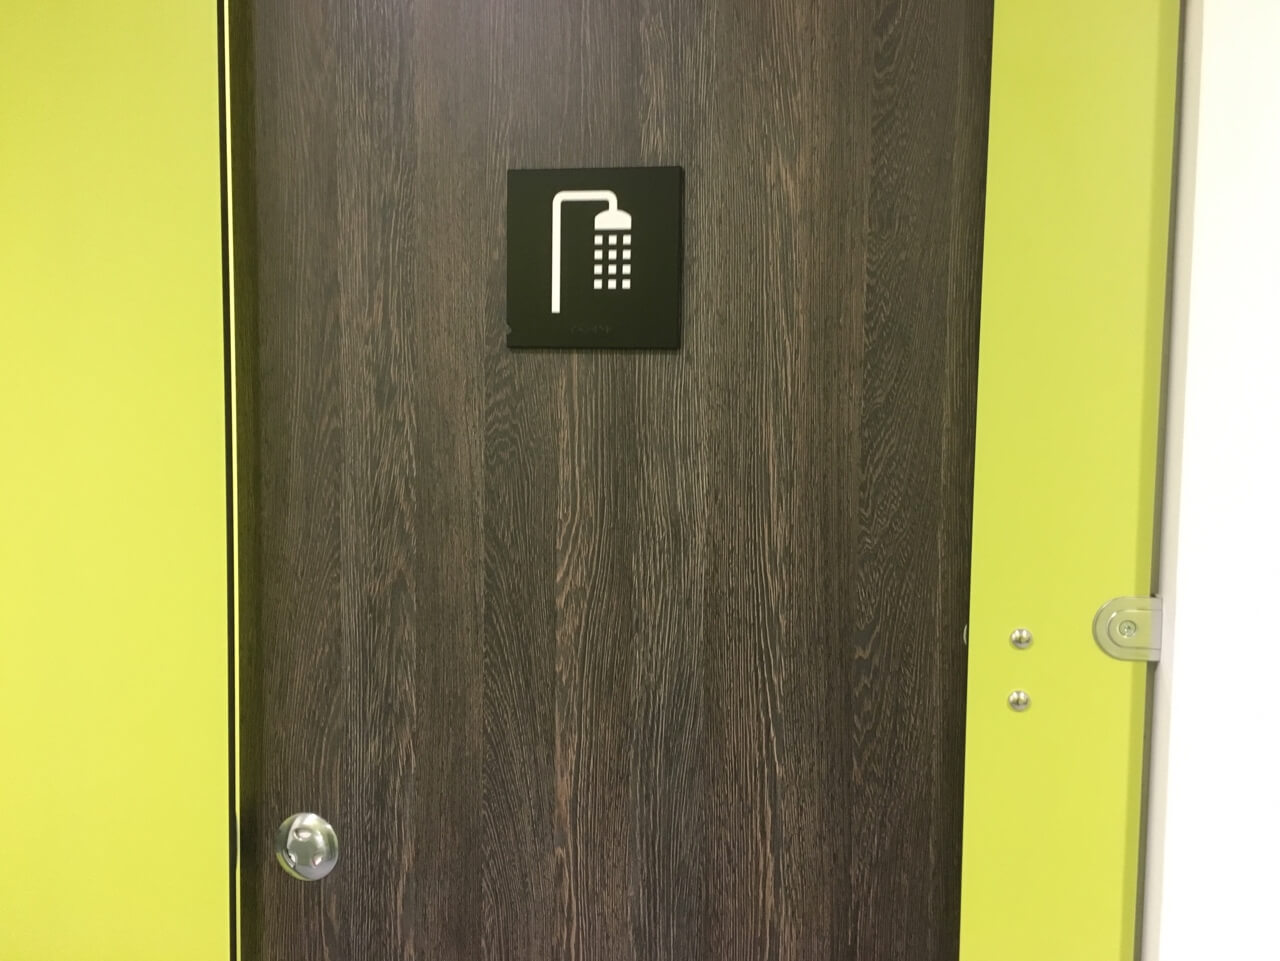 A sign showing a shower icon on the entrance door to the shower room